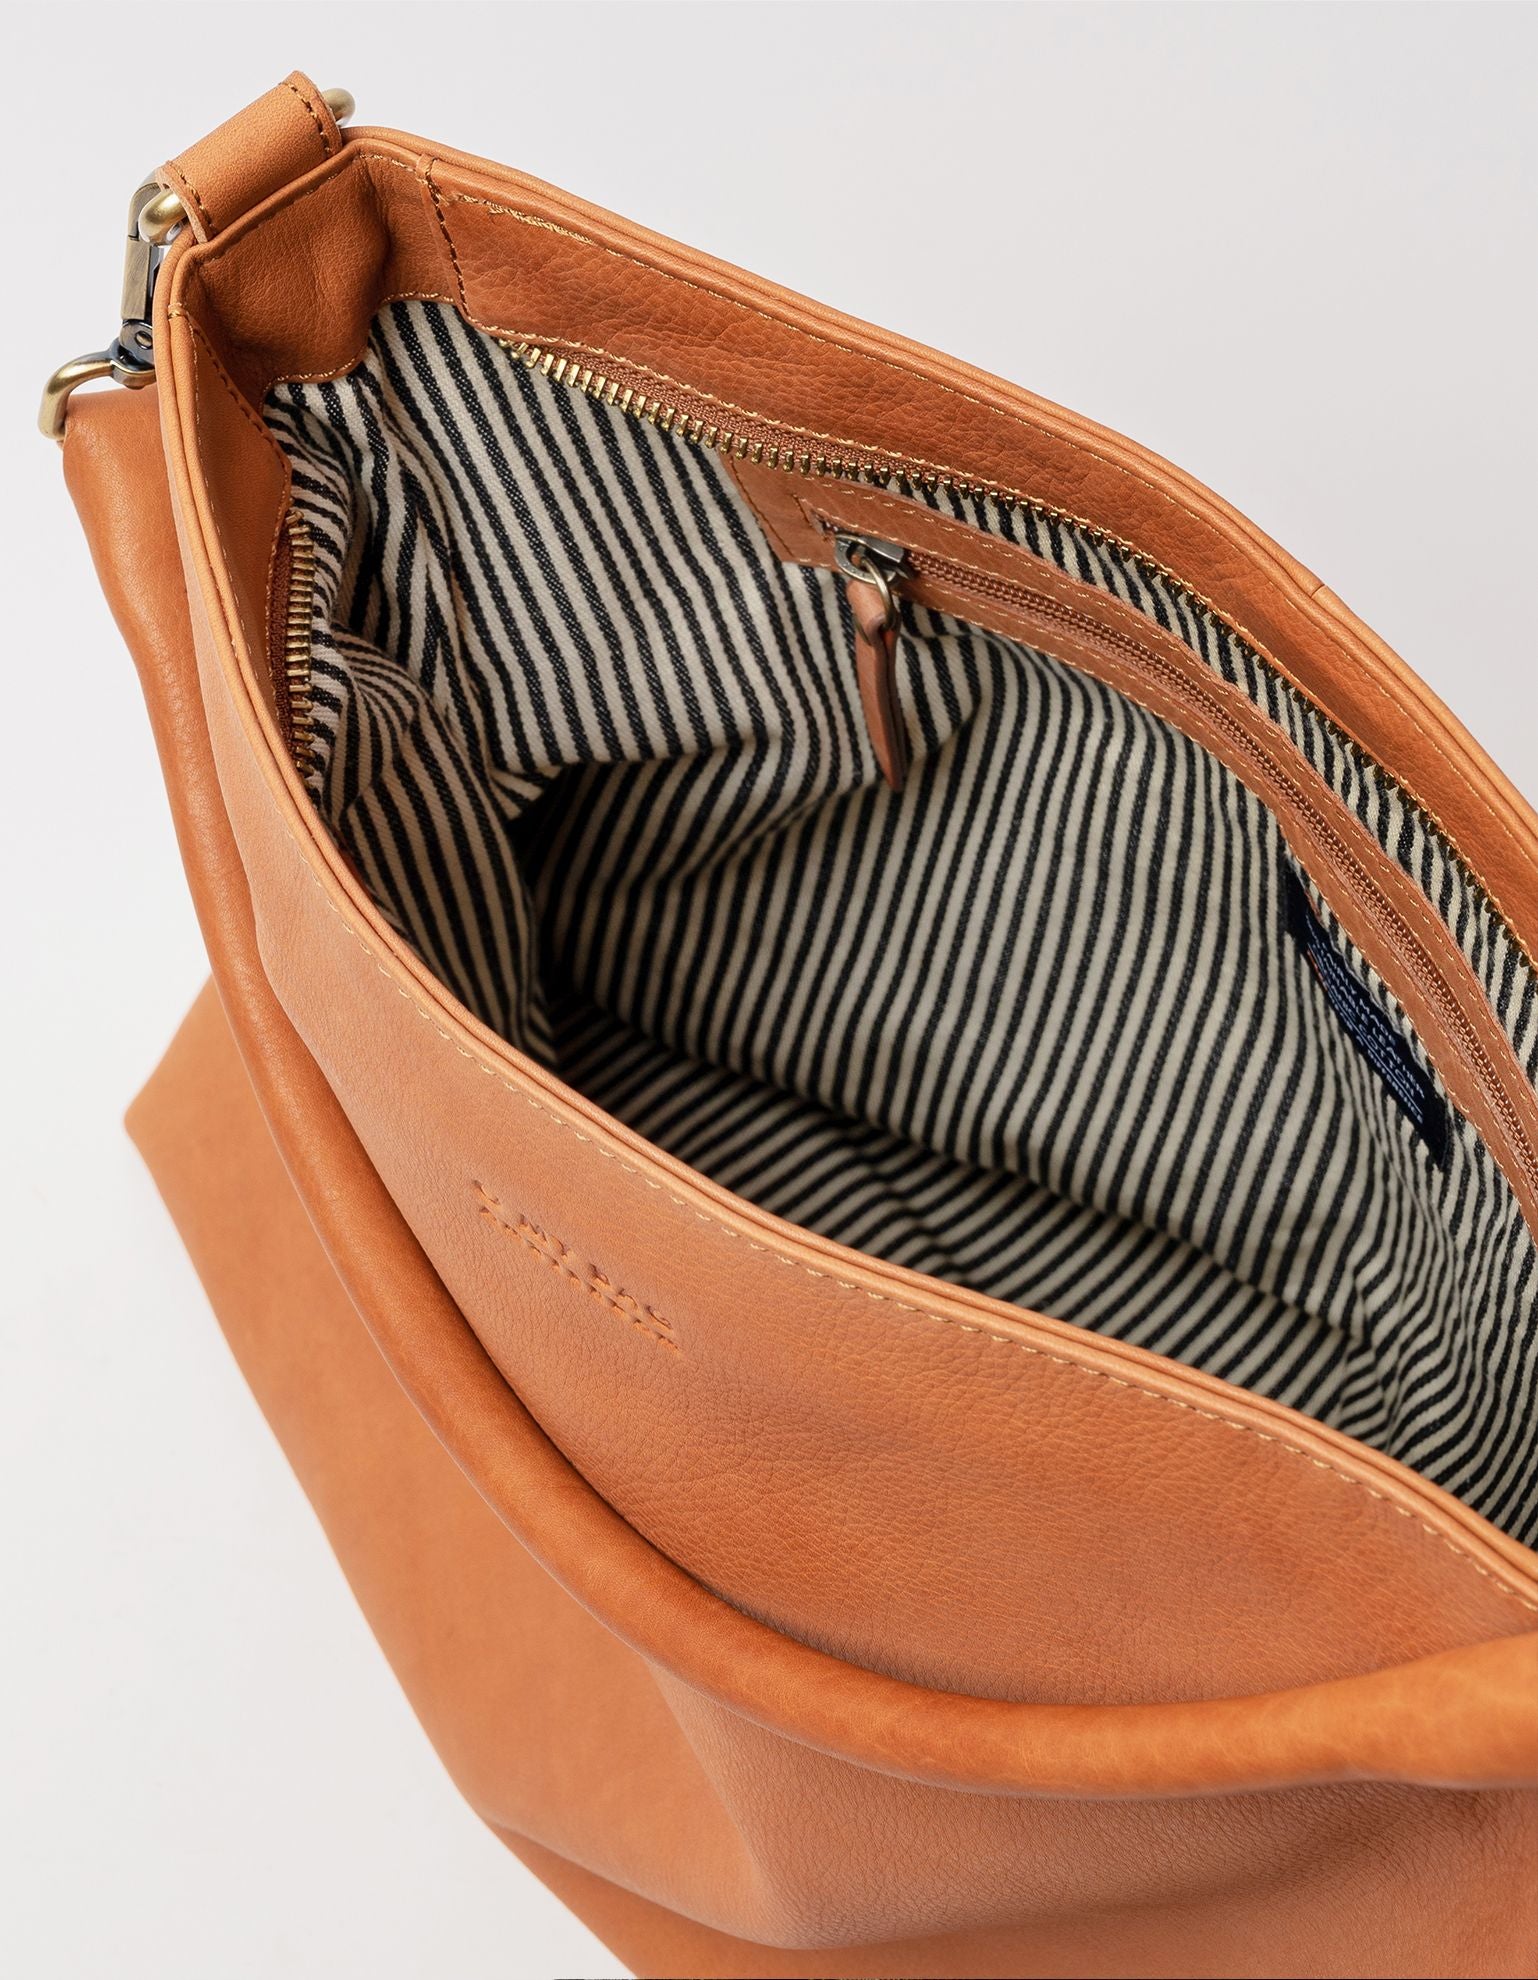 Wild Oak Leather shopper bag. Square shape with an adjustable and removable strap. Inside product image.